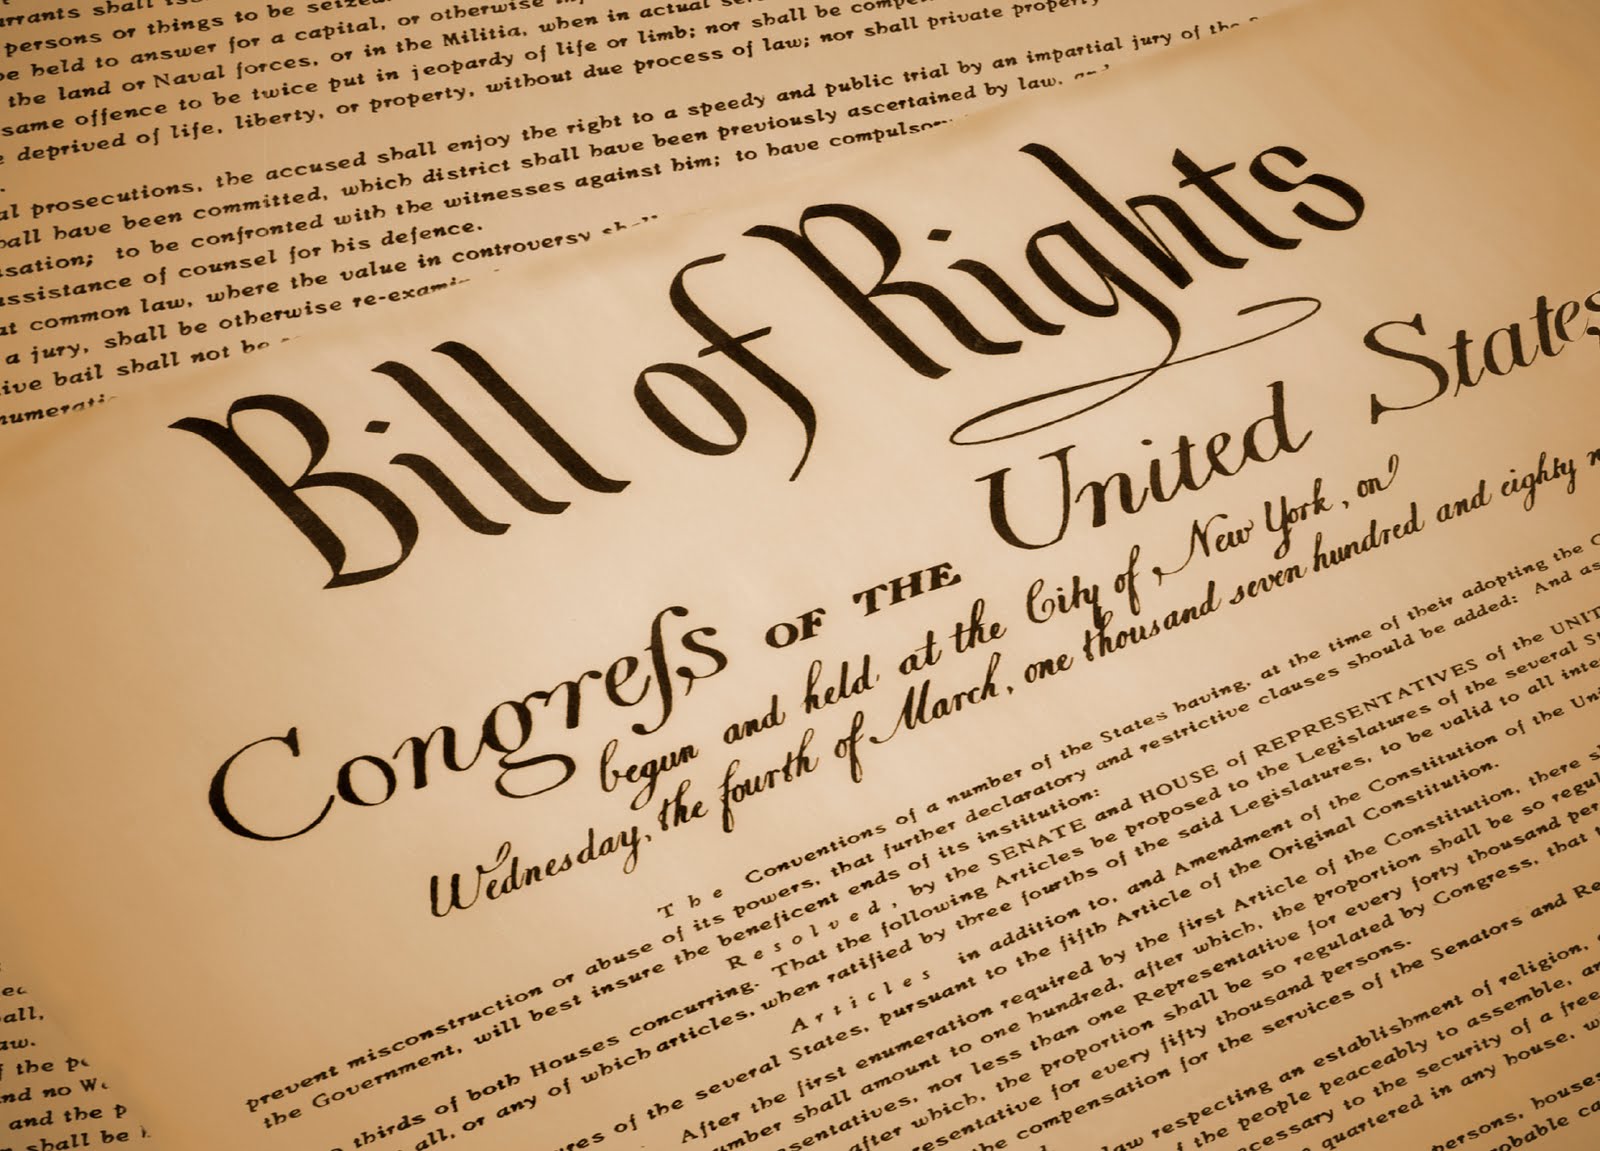 Can You Pass an 8th Grade Civics Test from 1954? Bill of Rights